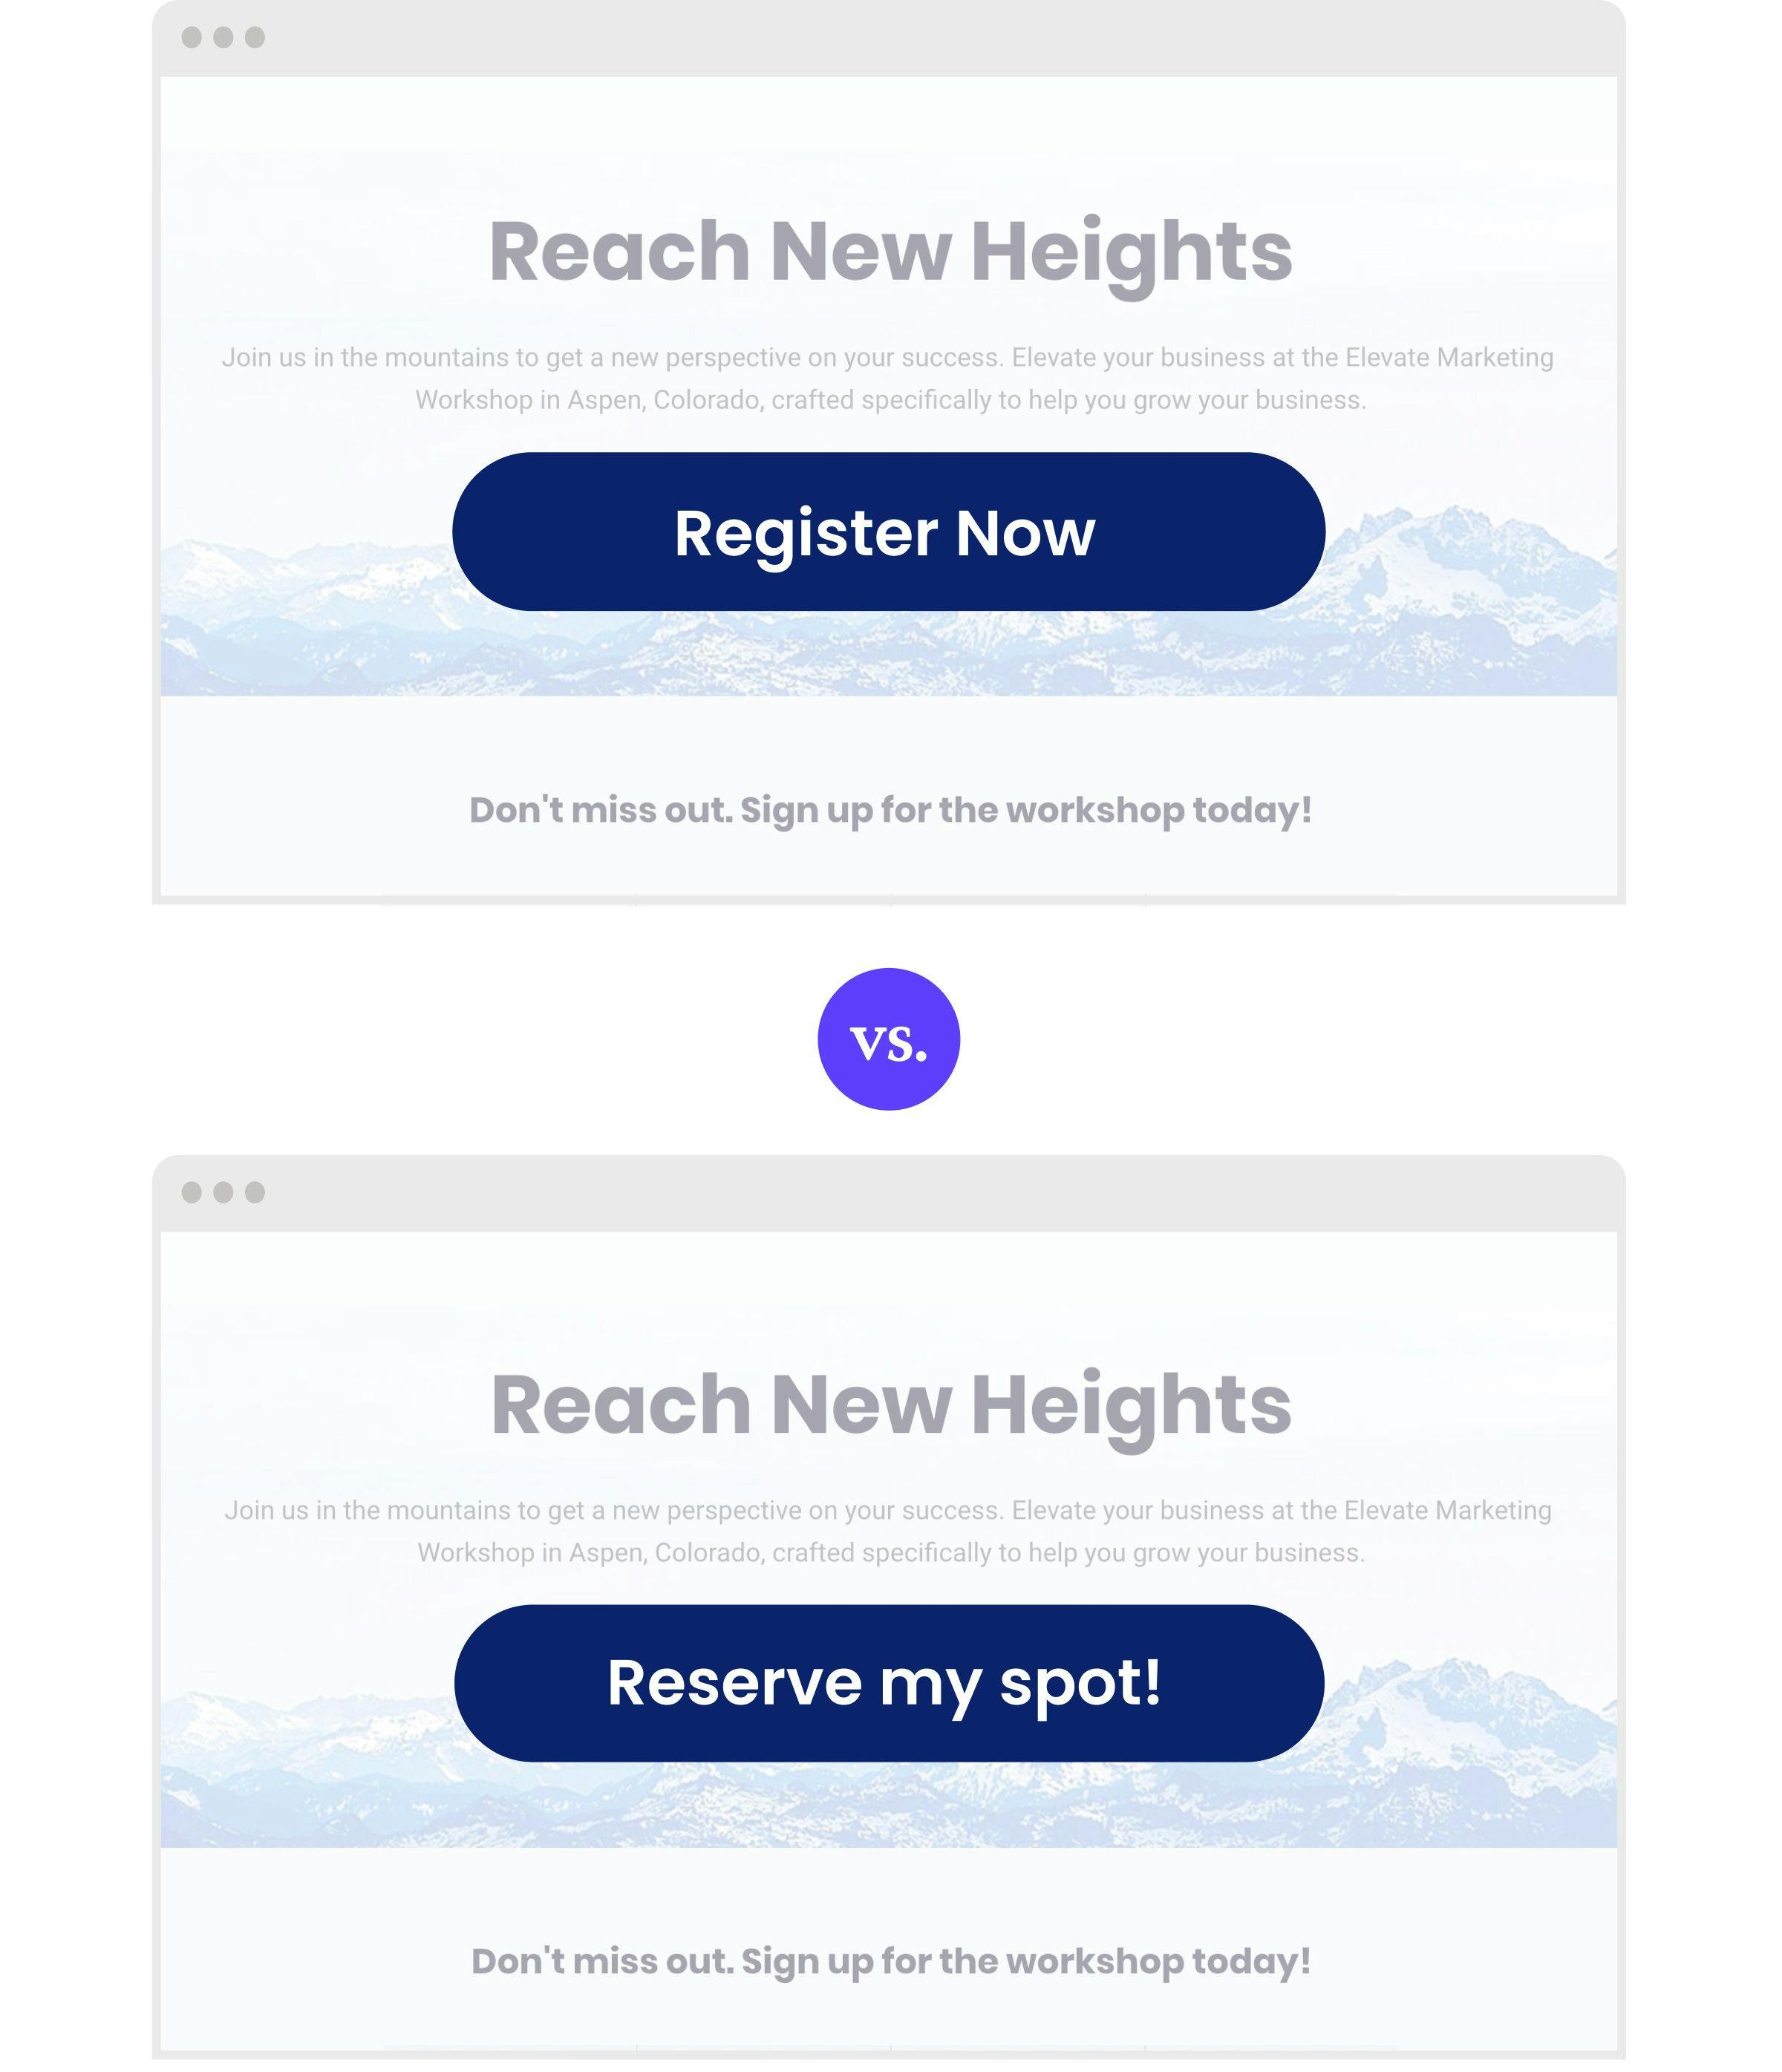 A/B testing landing page call-to-action